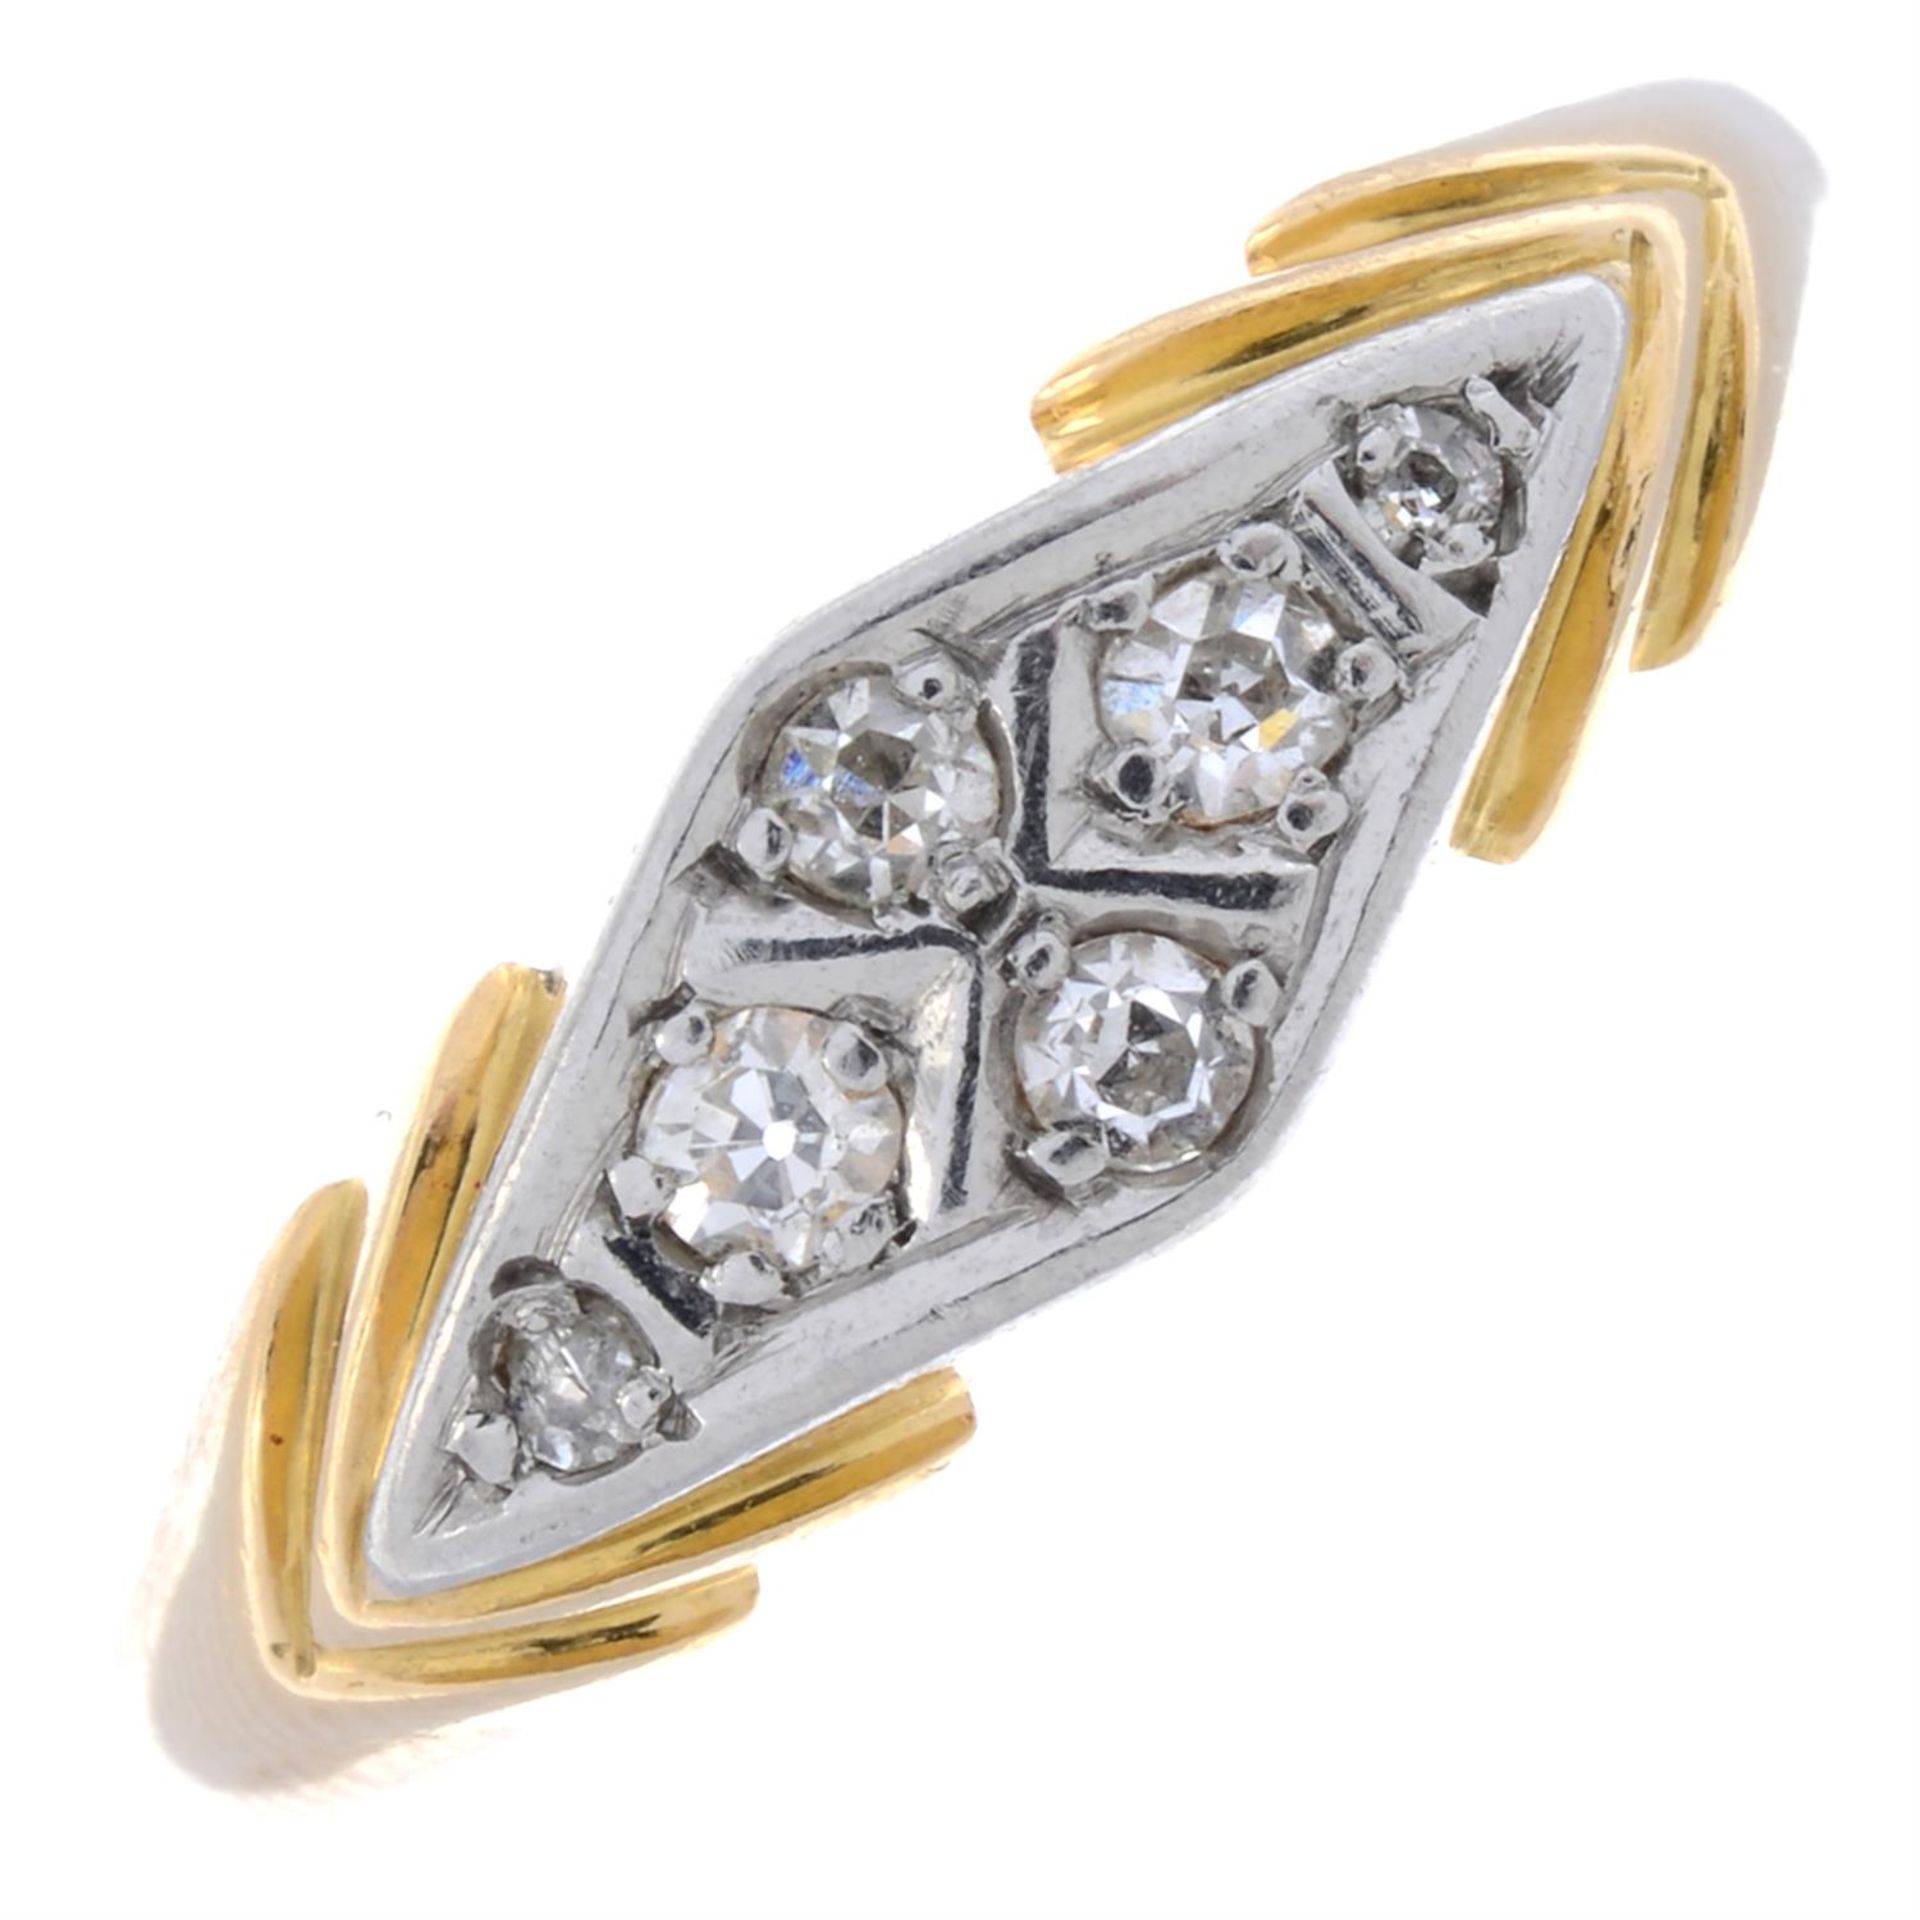 Early 20th century old-cut diamond ring